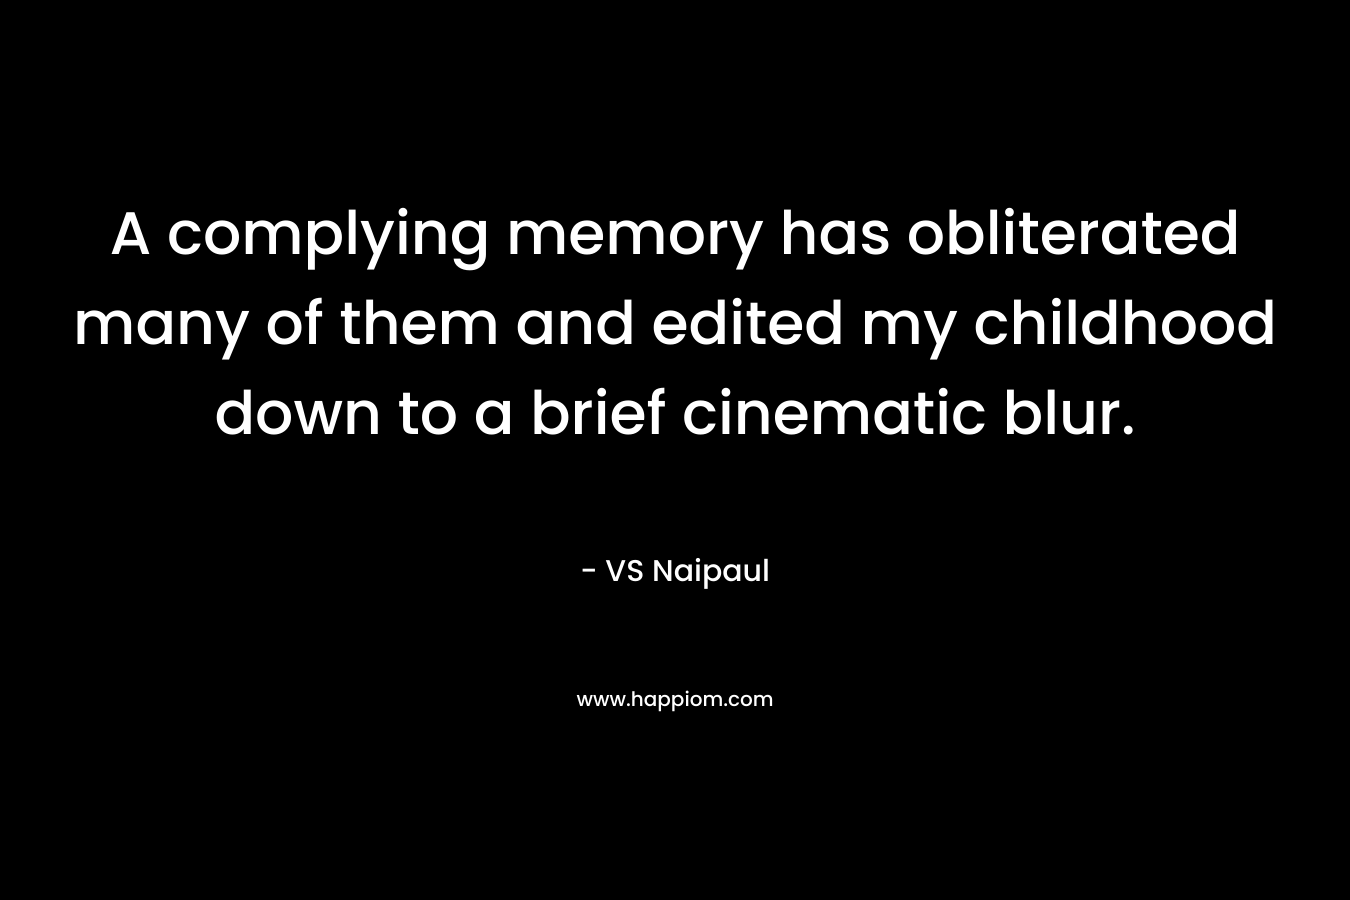 A complying memory has obliterated many of them and edited my childhood down to a brief cinematic blur. – VS Naipaul